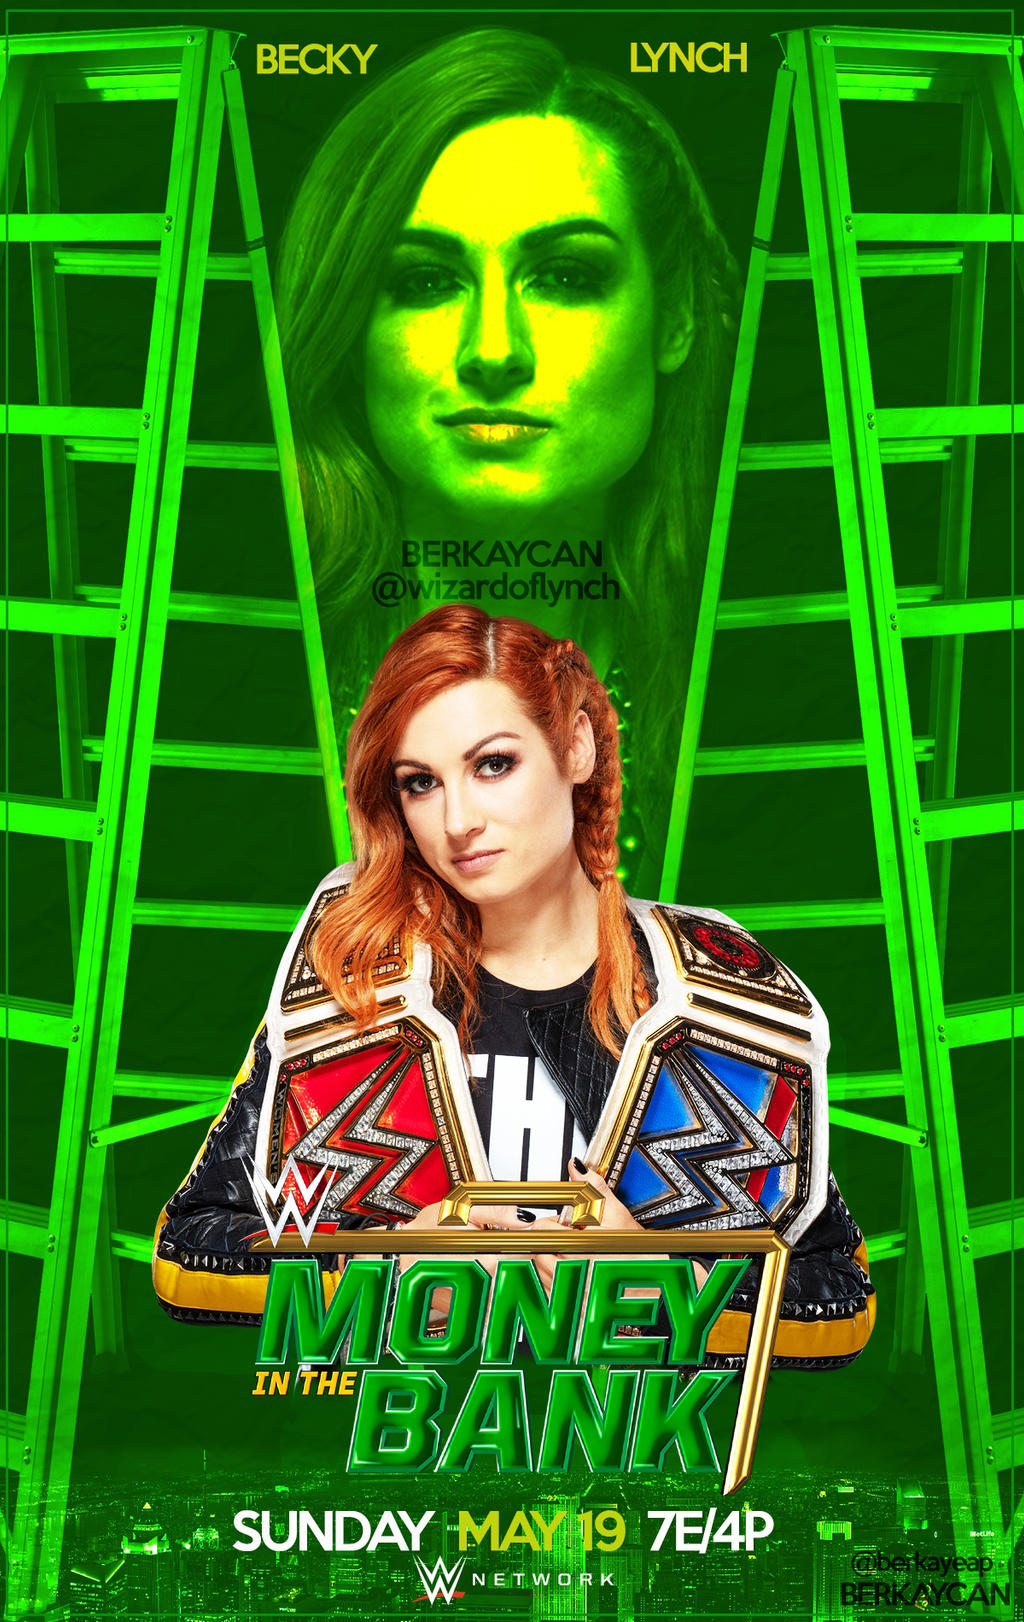 Becky lynch wwe money in the bank poster by berkaycan on